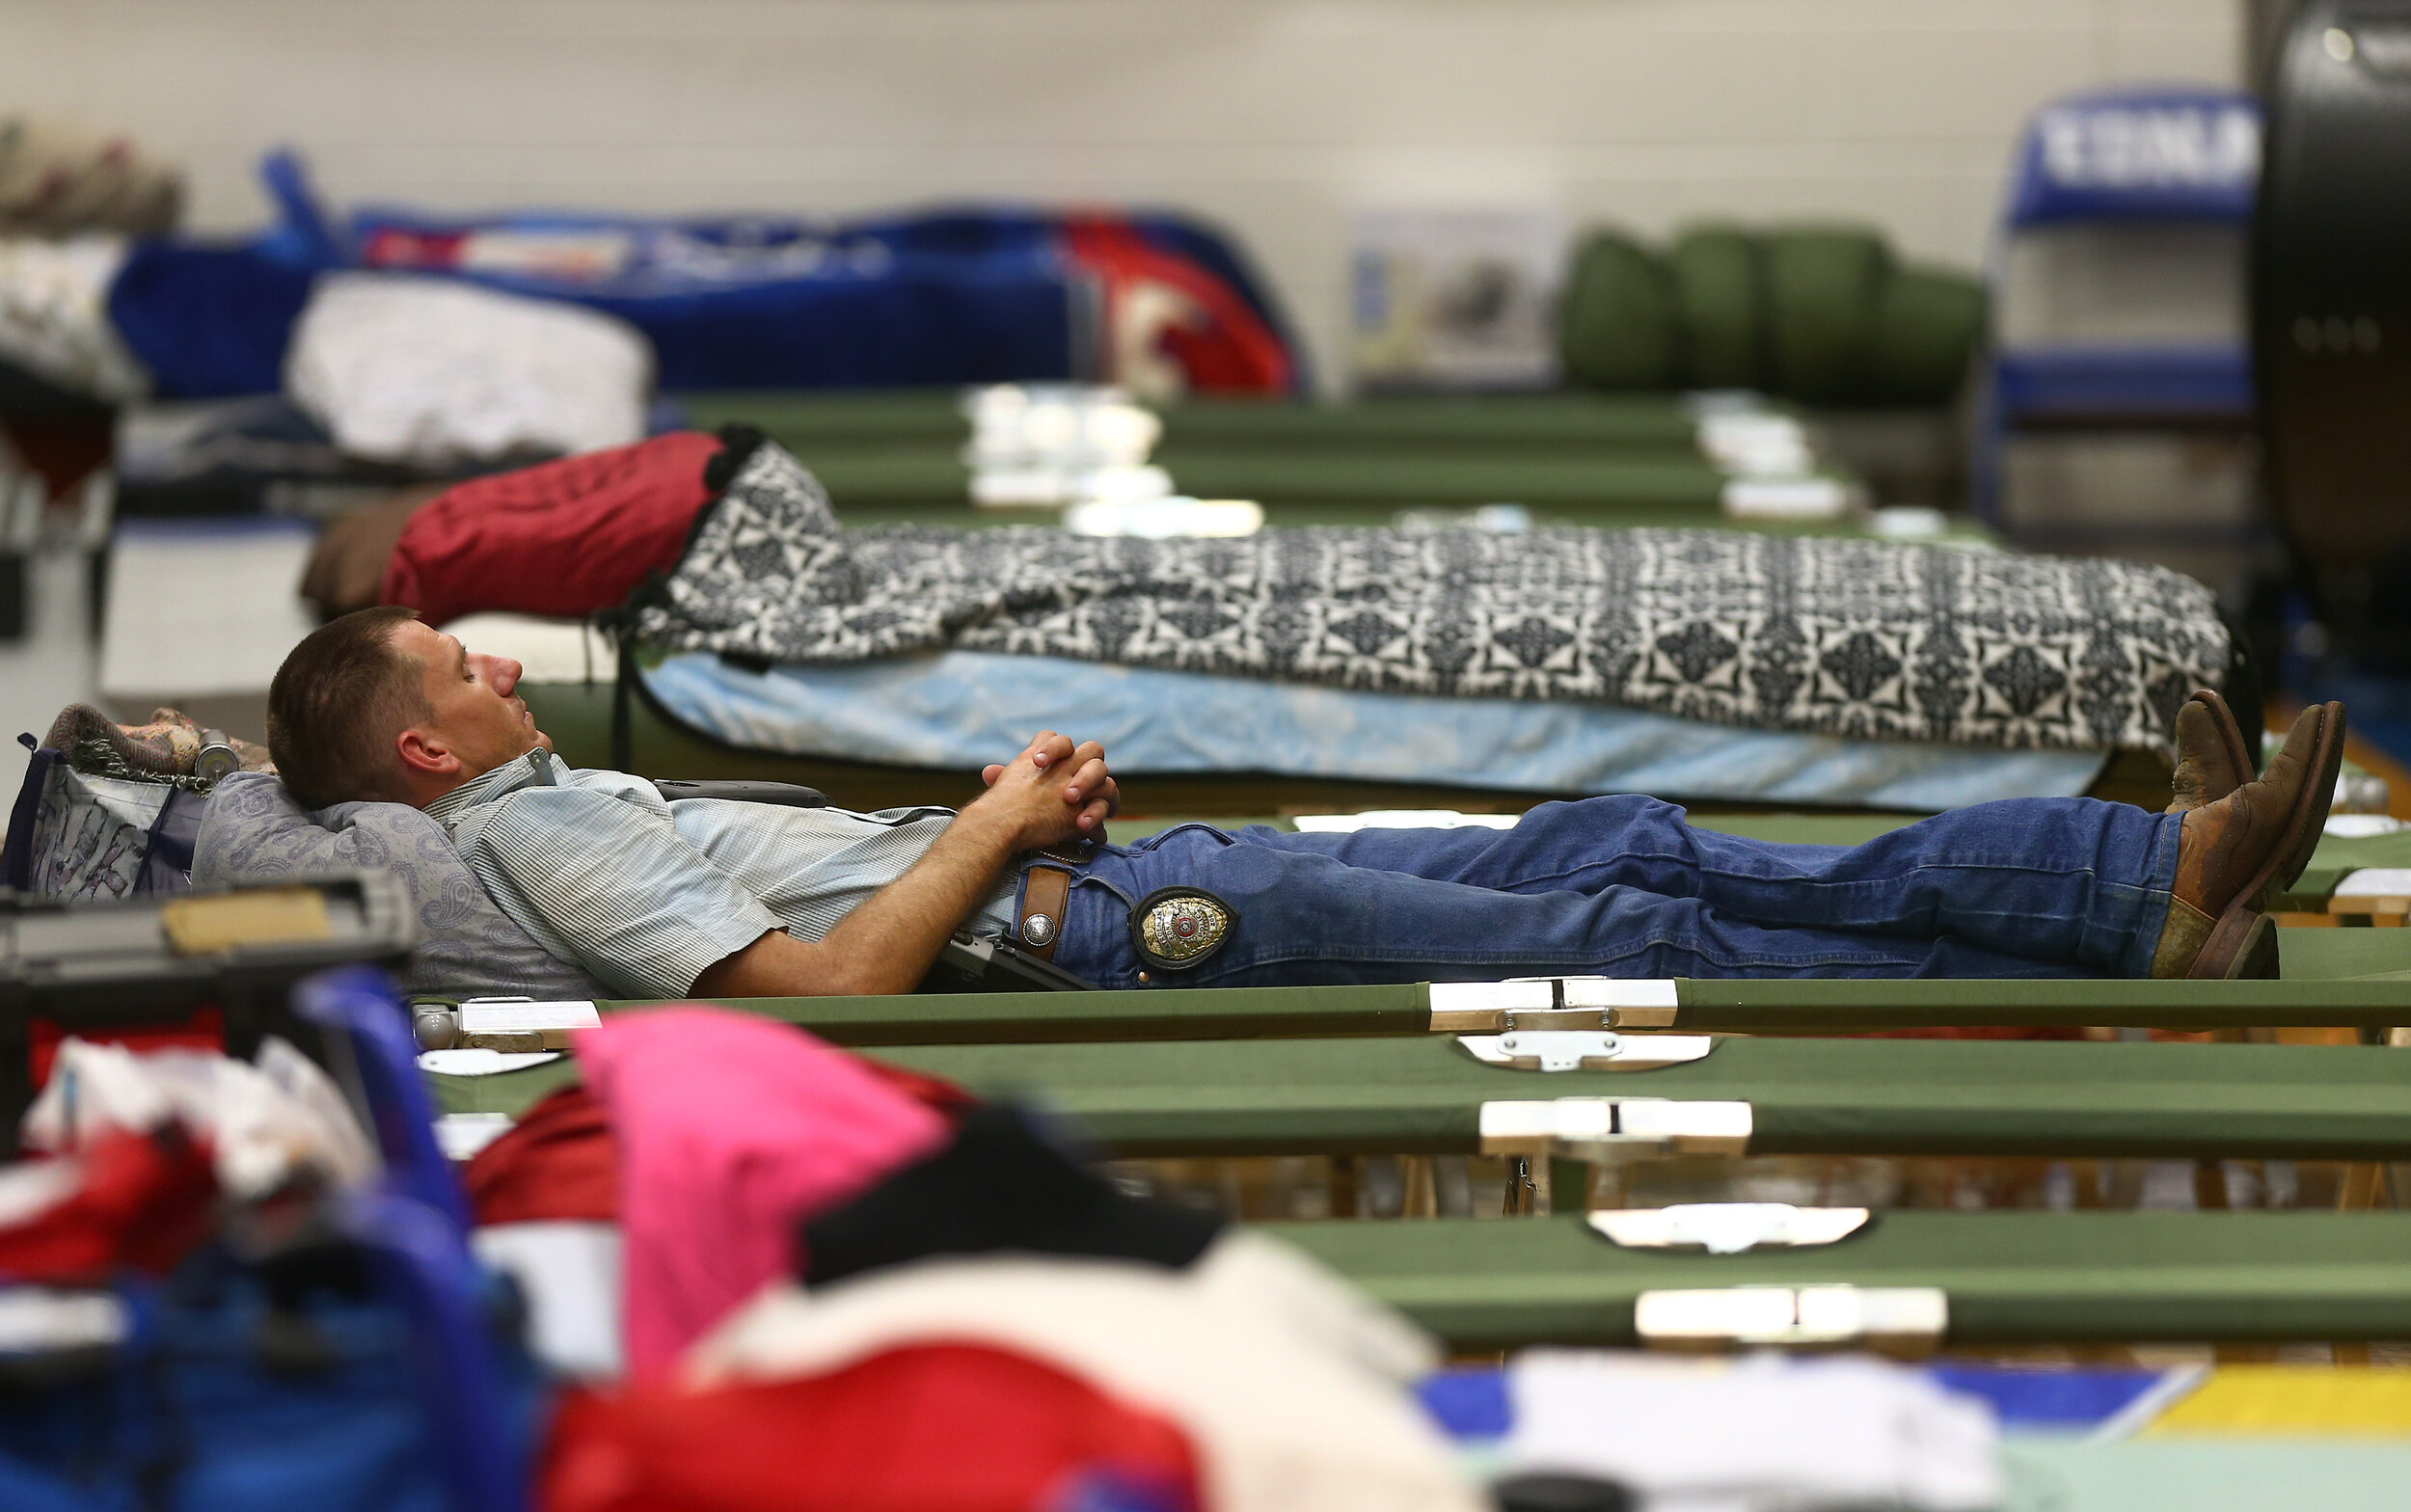  Edna Police patrolman Robert Chastain takes a nap inside the Edna High School Gymnasium, where Jackson County first responders took shelter, as Hurricane Harvey made landfall Friday, Aug. 25, 2017, in Edna, Texas.  Chastain said he had not slept in 